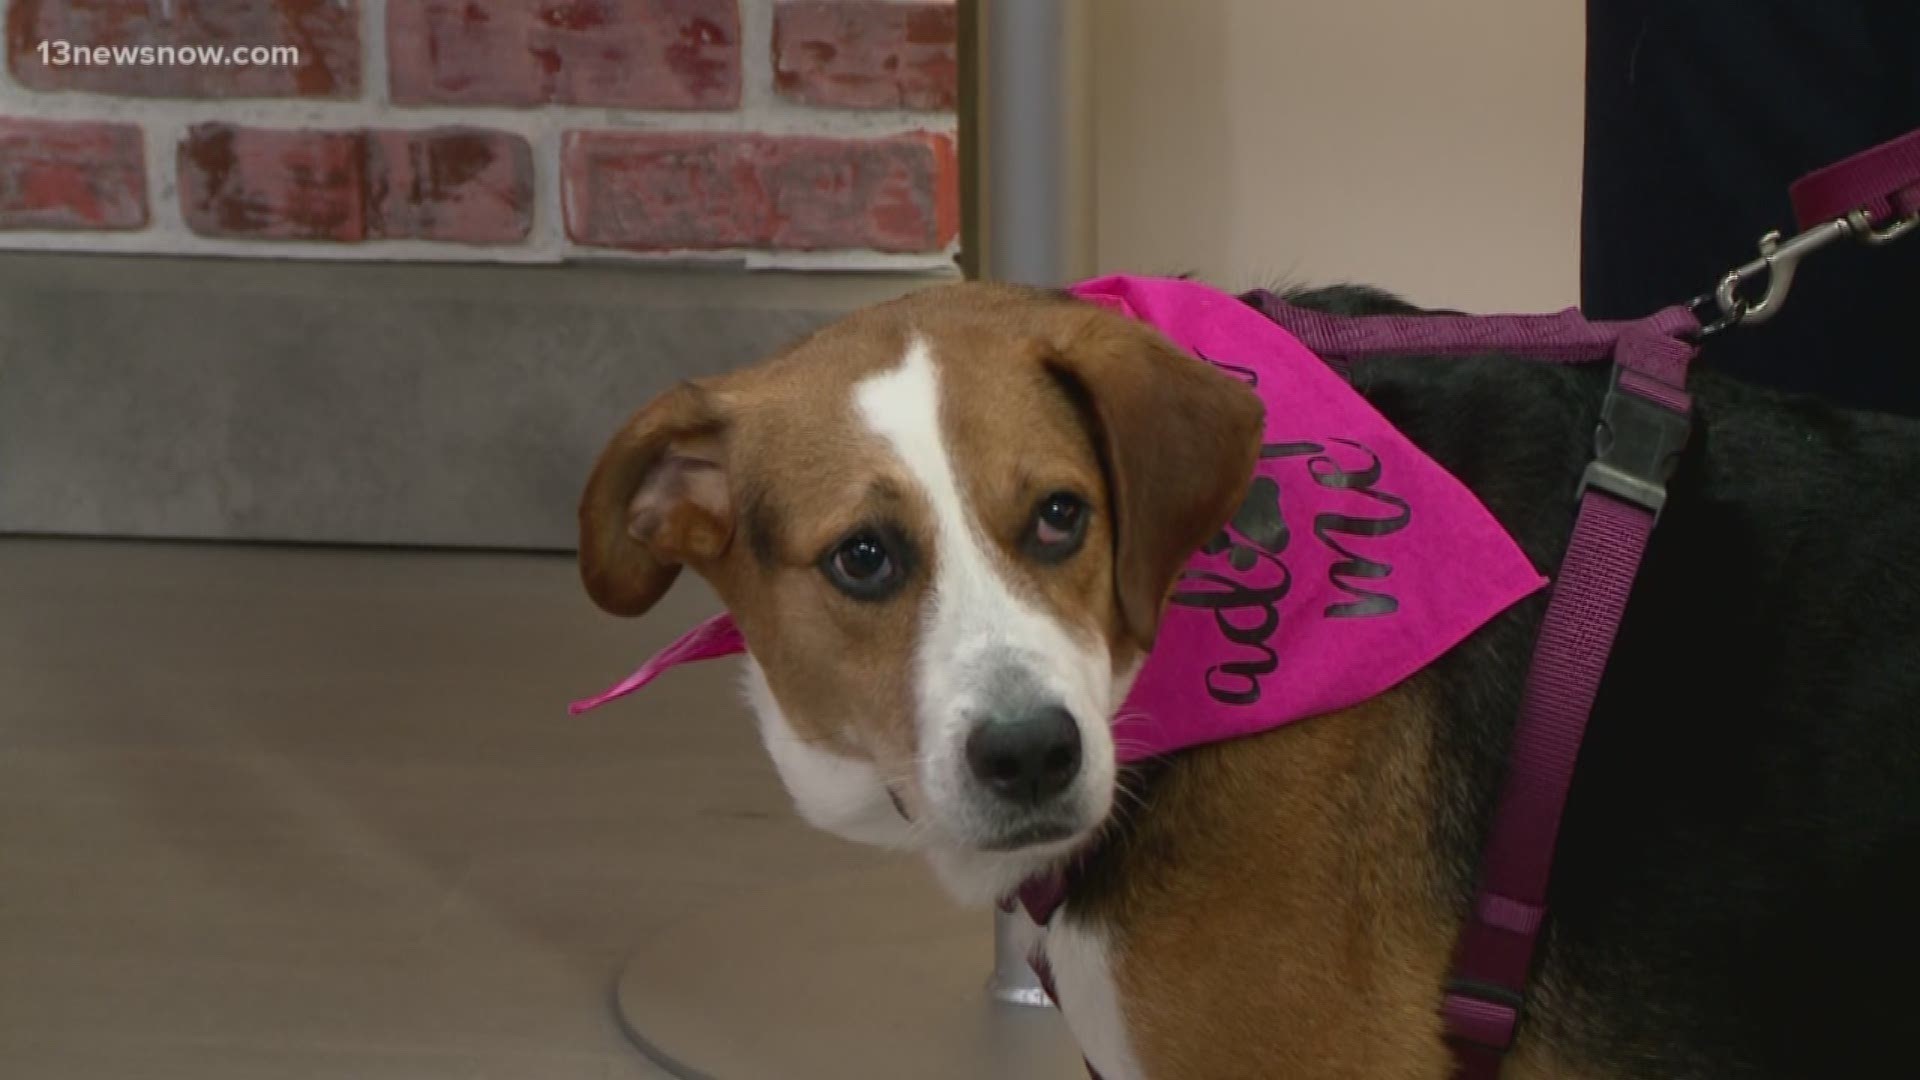 Olive is an 8-year-old hound mix and she's looking for her forever home. You can find her at the Chesapeake Humane Society.